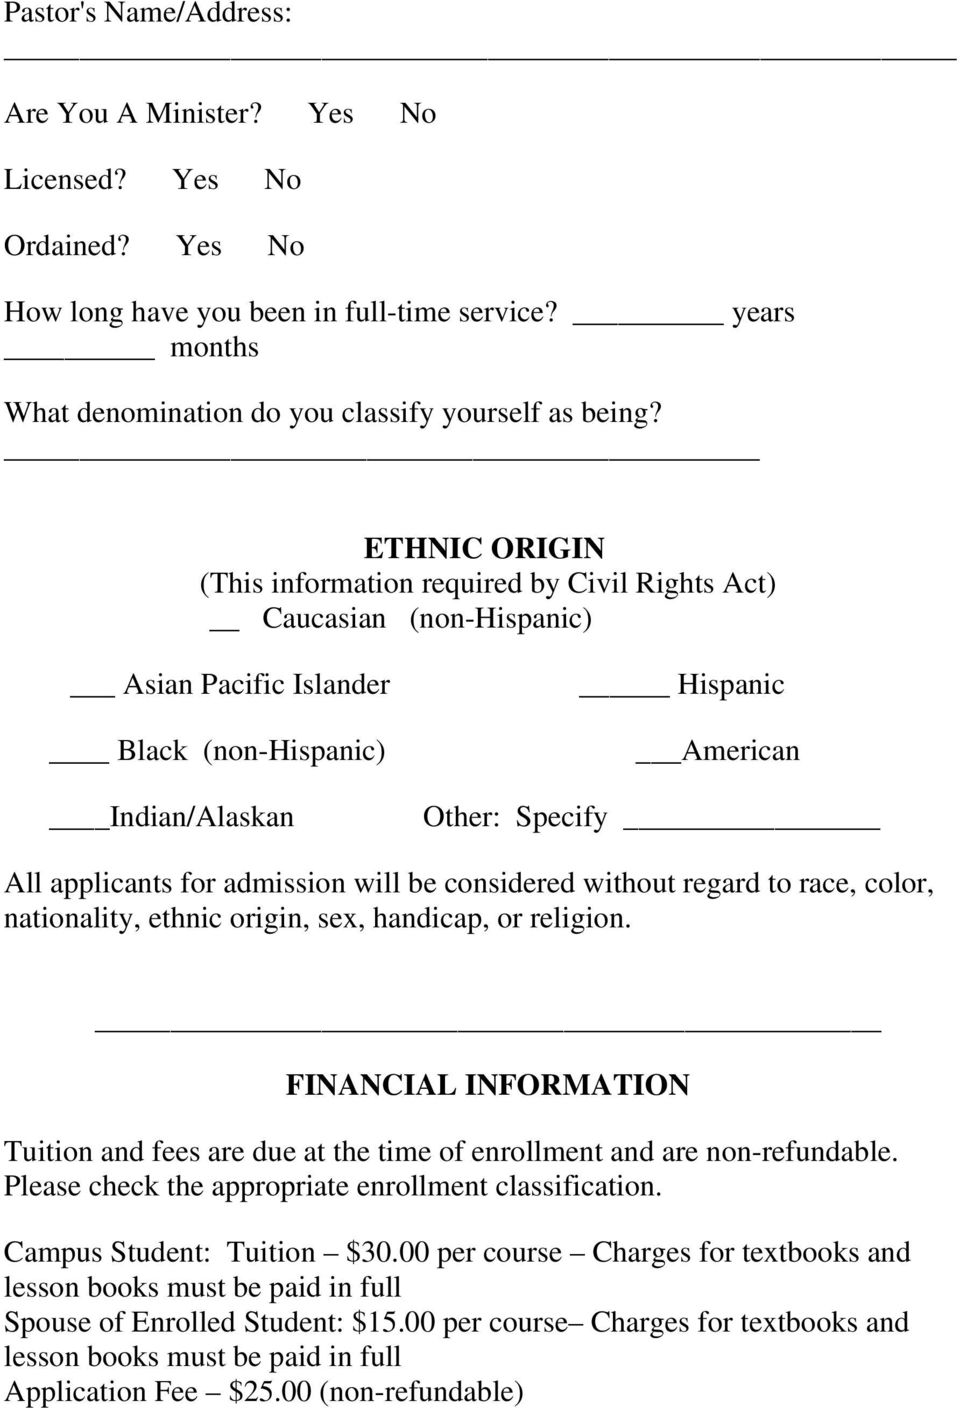 admission will be considered without regard to race, color, nationality, ethnic origin, sex, handicap, or religion.